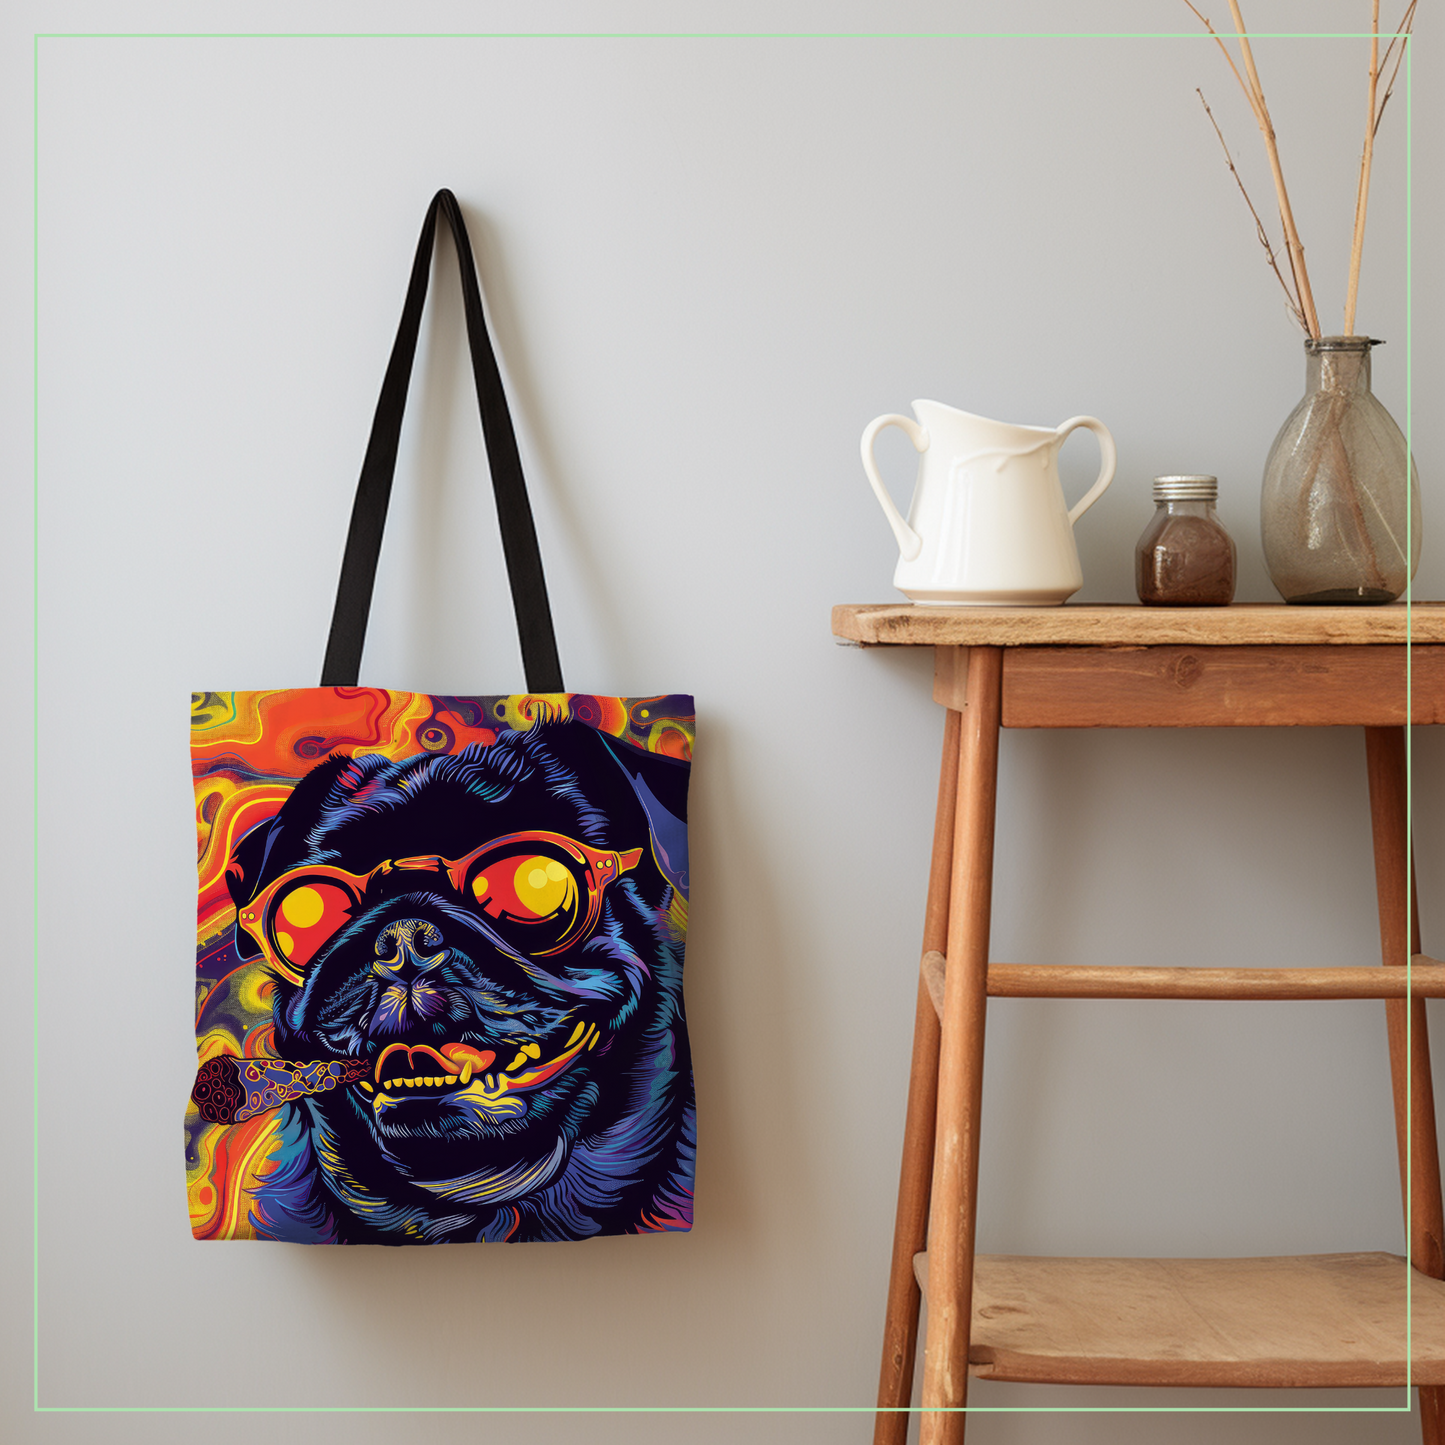 Dope - Pug Tote Bag Collection